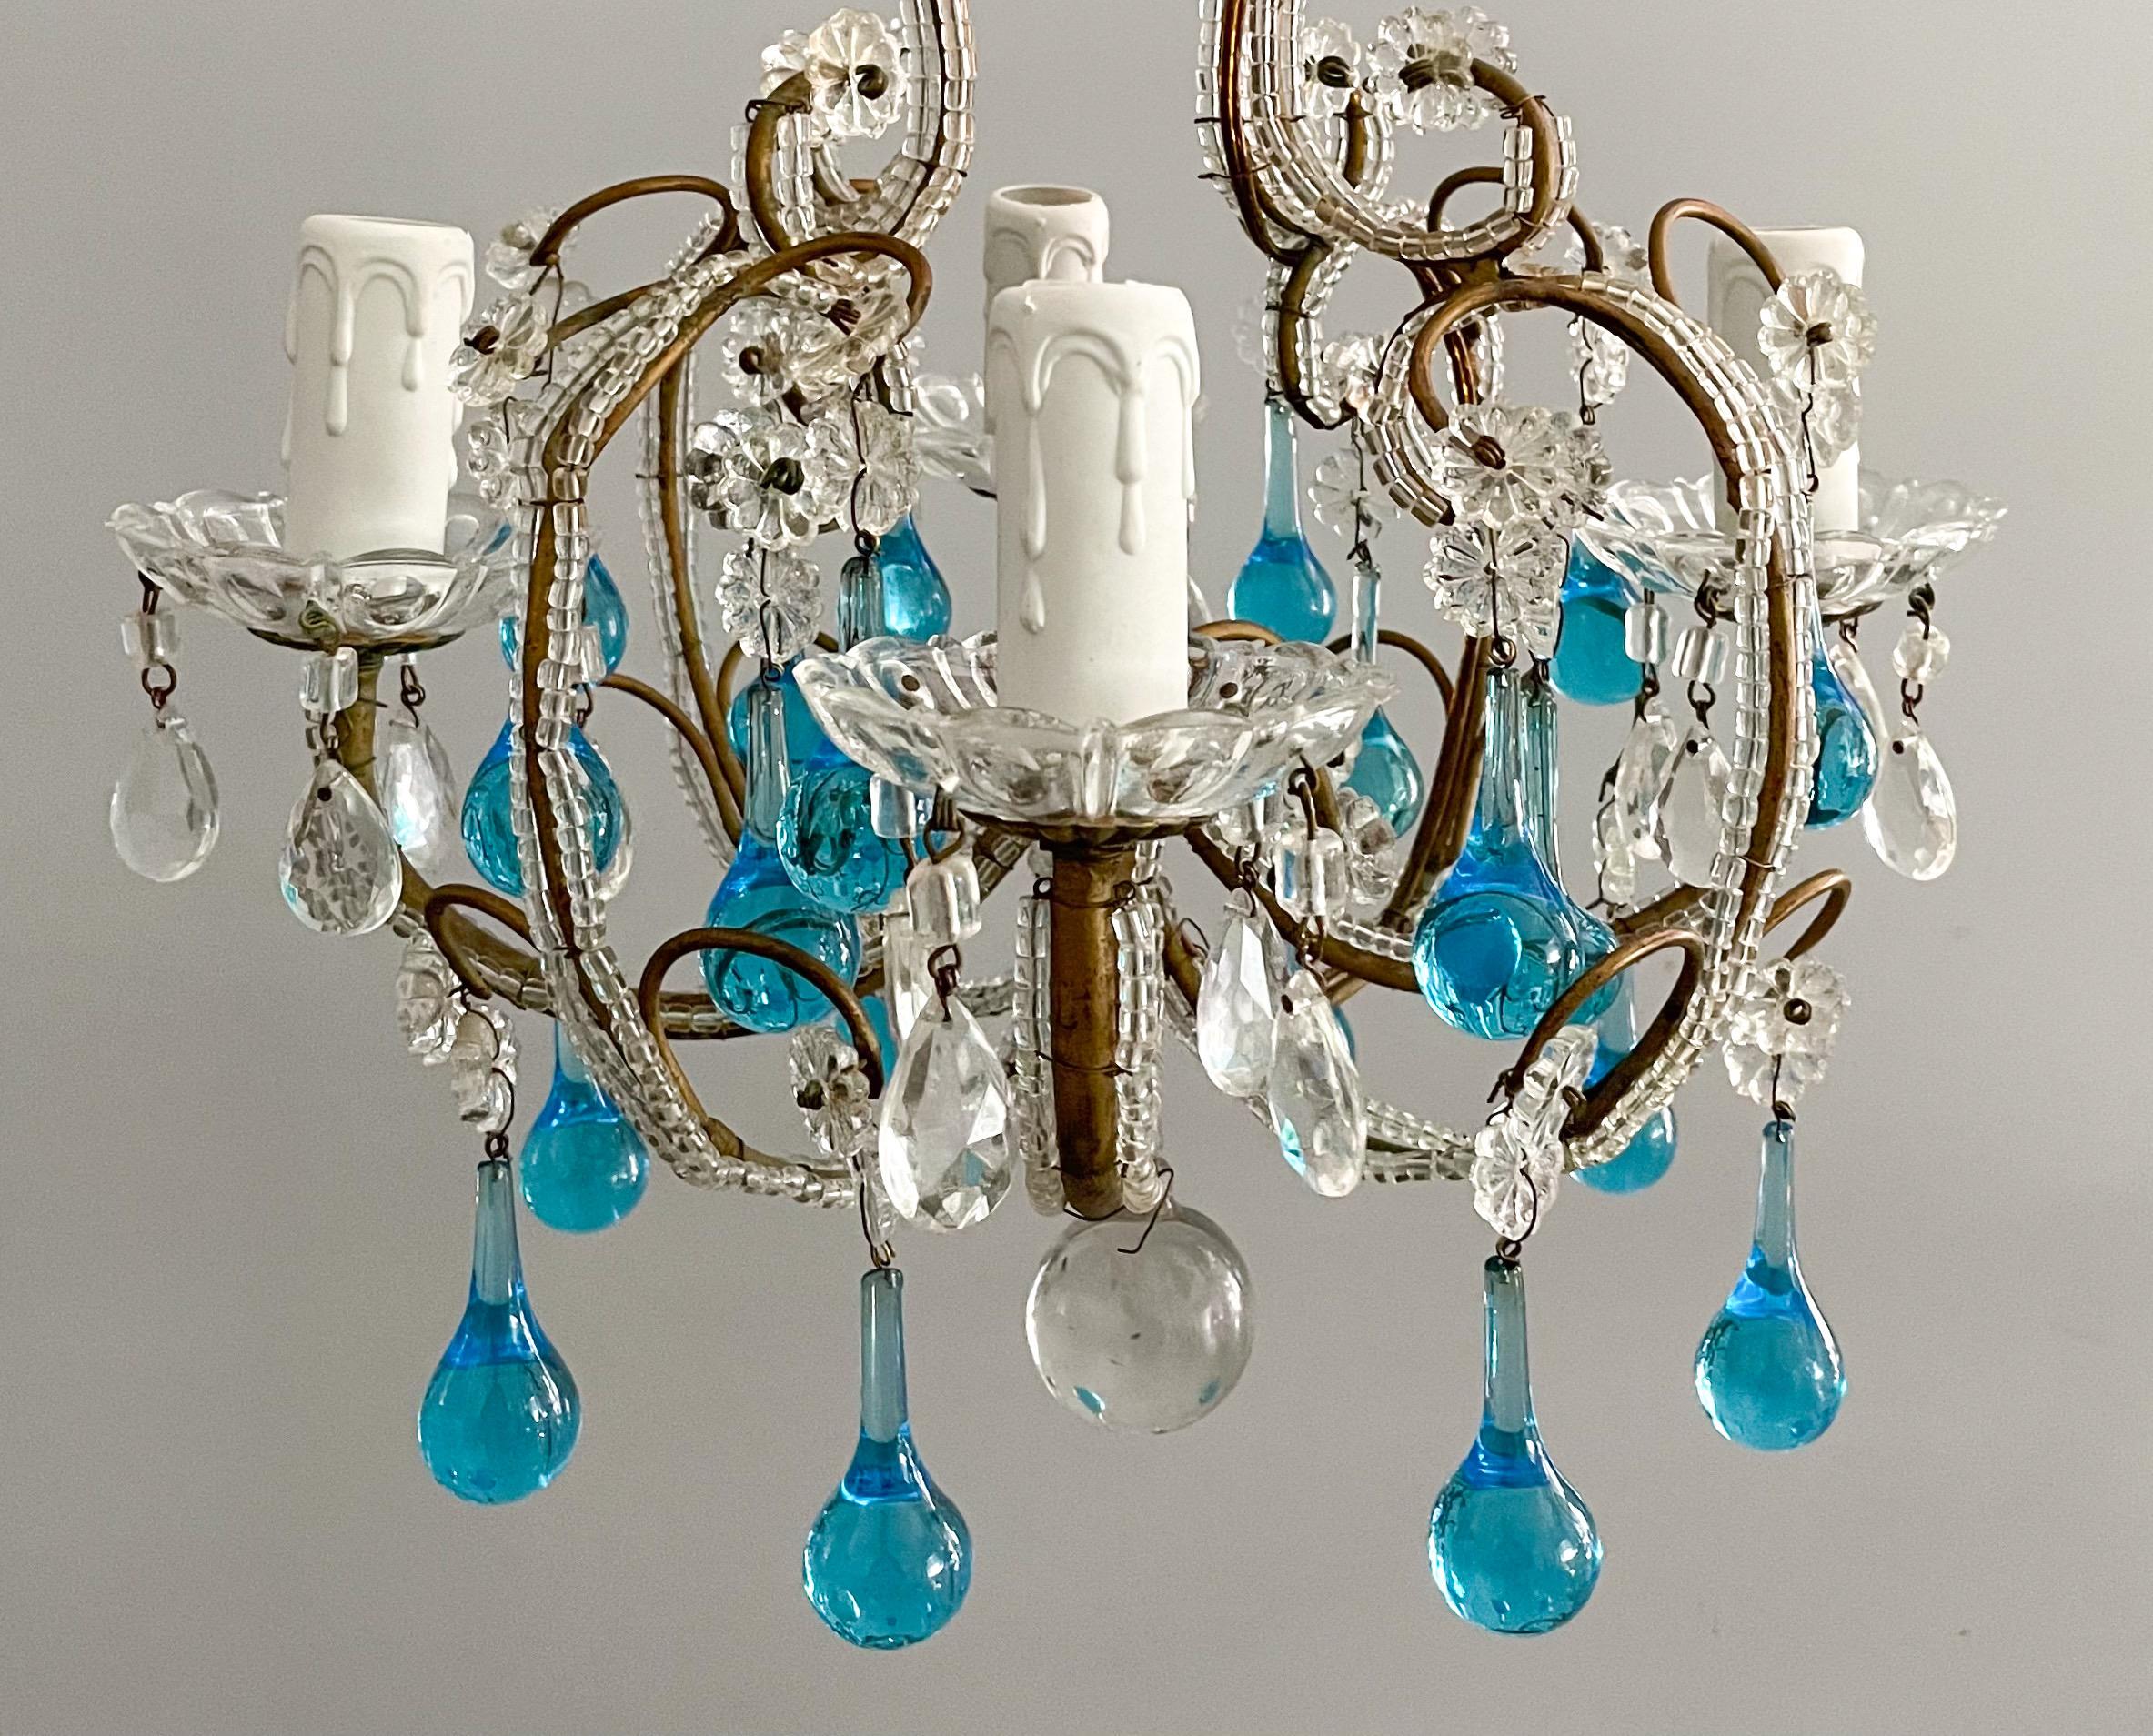 Mid-20th Century Italian Crystal Chandelier with Blue Drops